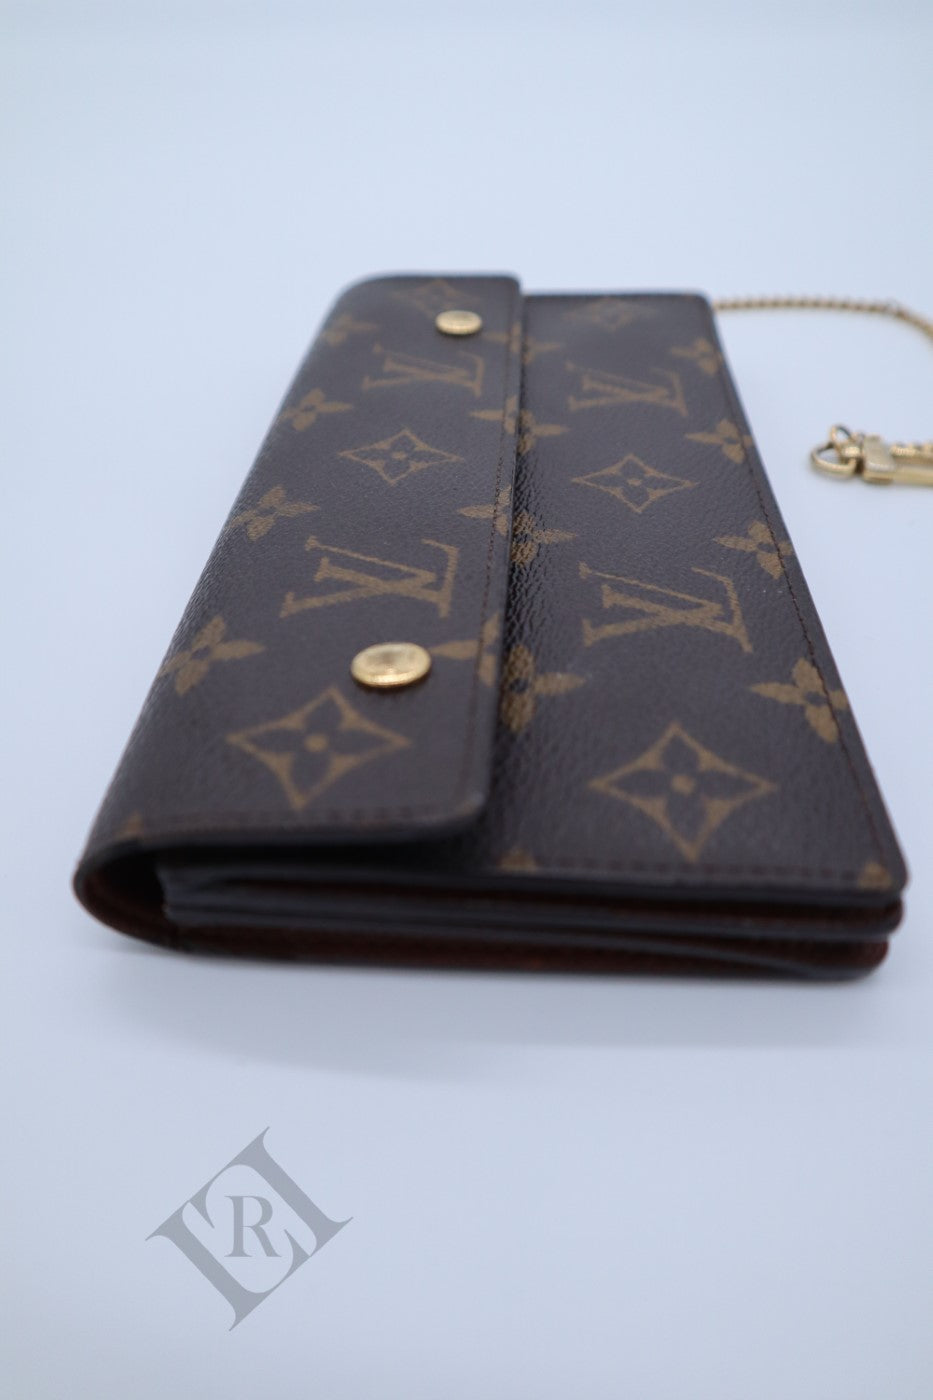 The Louis Vuitton Accodion Moto wallet is classic and edgy at the same